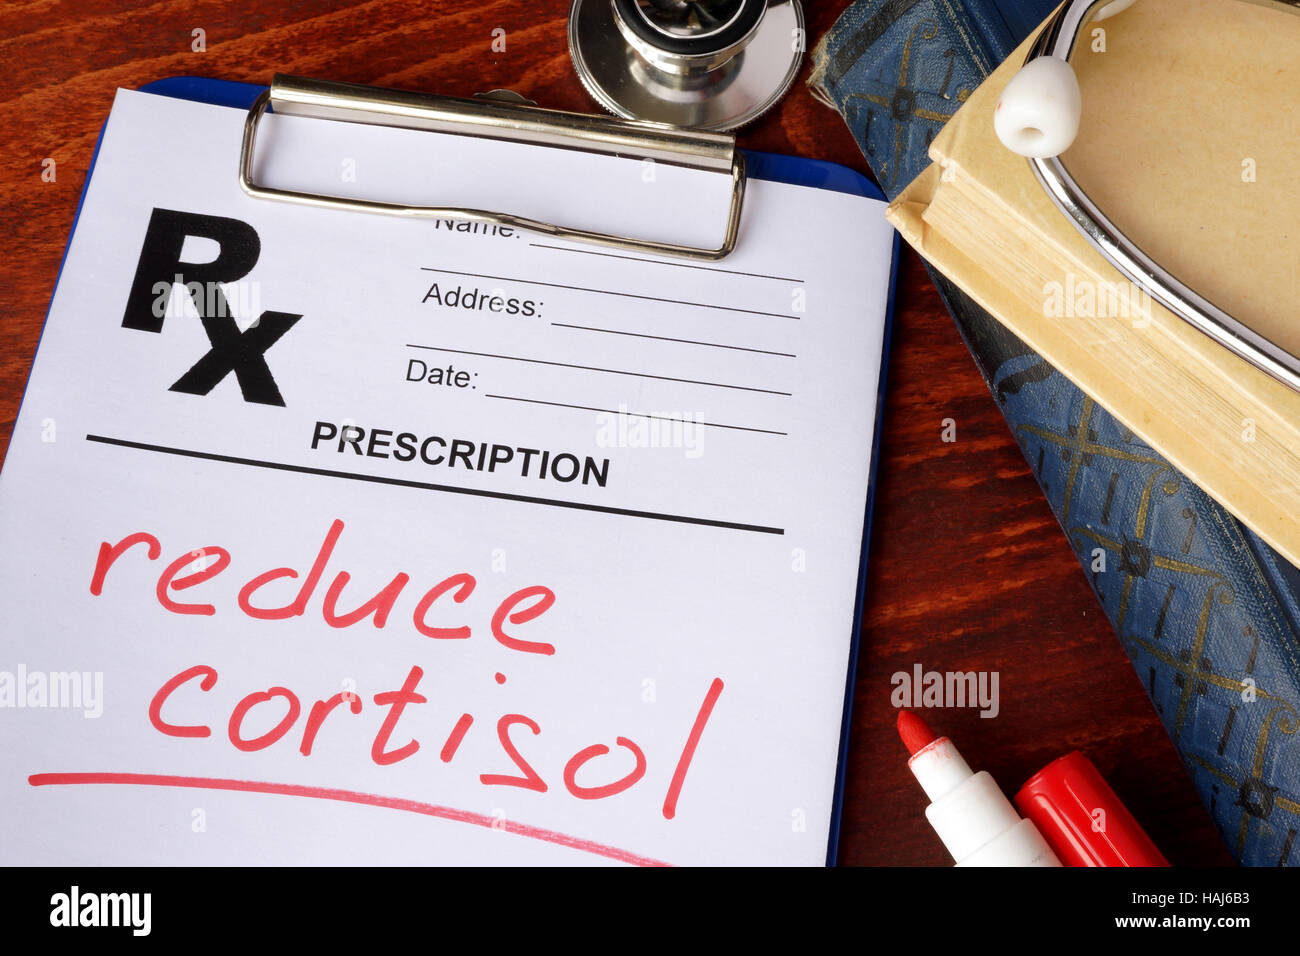 Prescription form with words reduce cortisol. Medical concept. Stock Photo